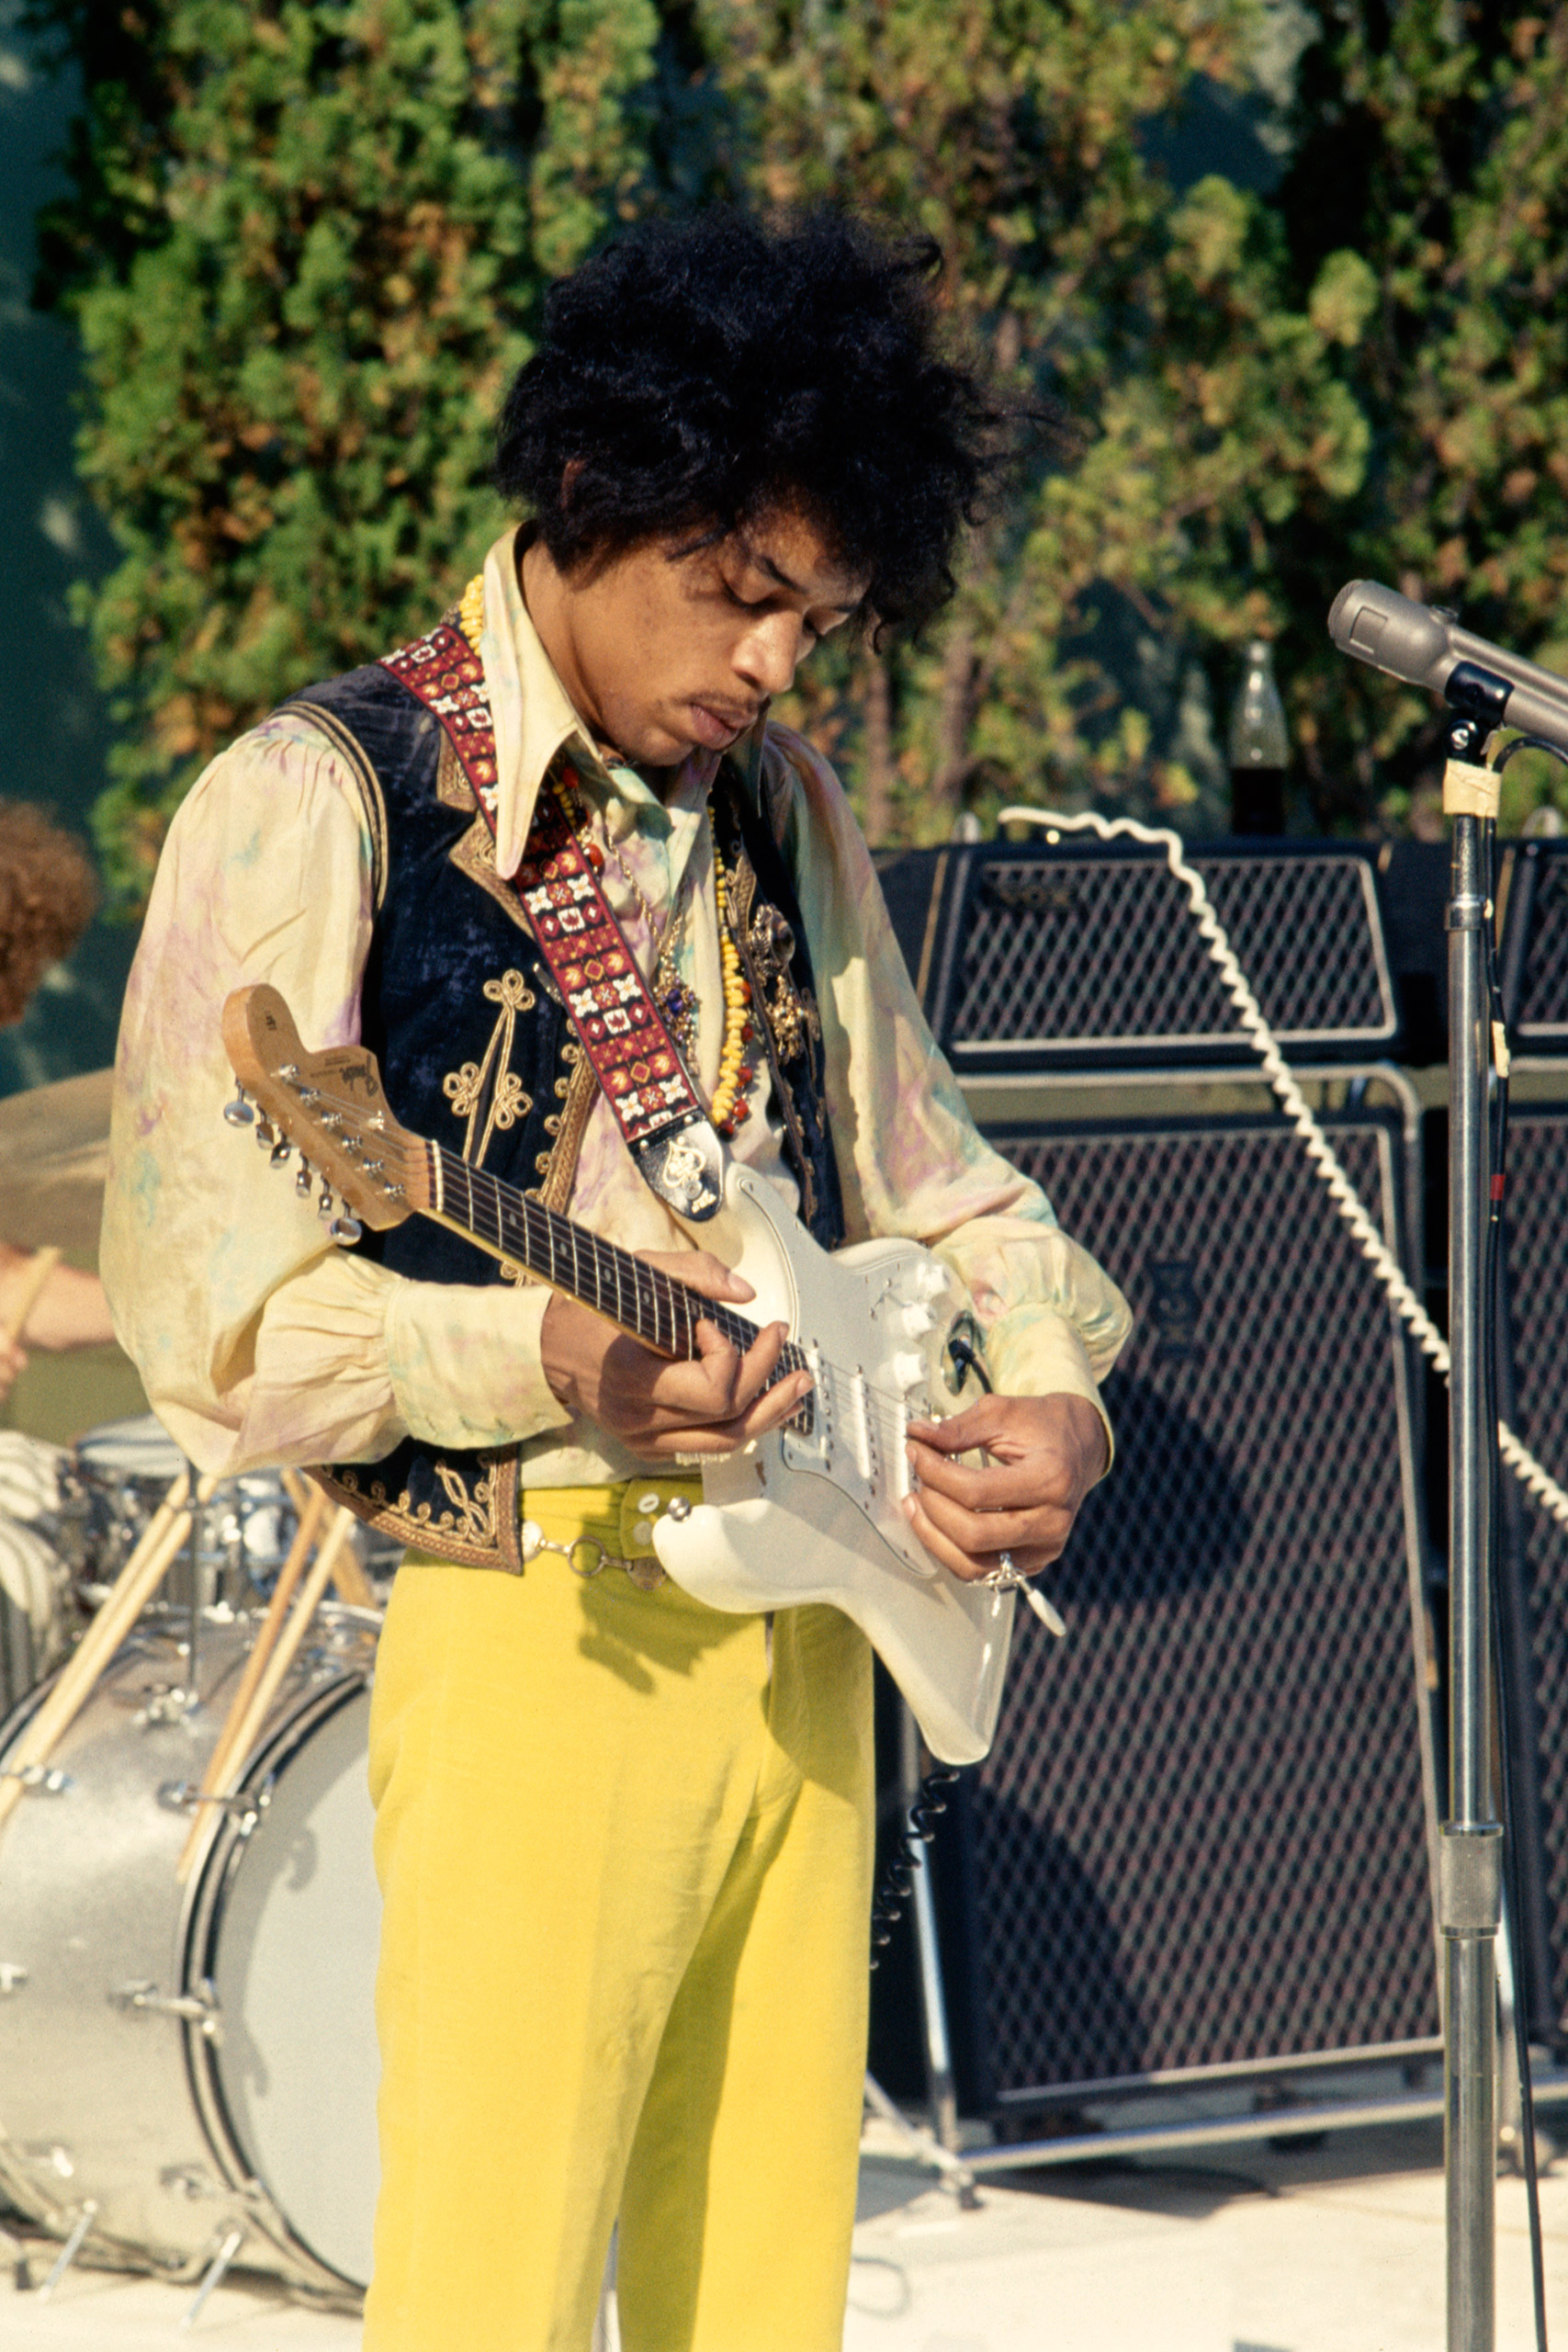 Jimi Hendrix on stage during a rehearsal ahead of the performance by The Jimi Hendrix Experience at the Hollywood Bowl on Aug. 18, 1967.